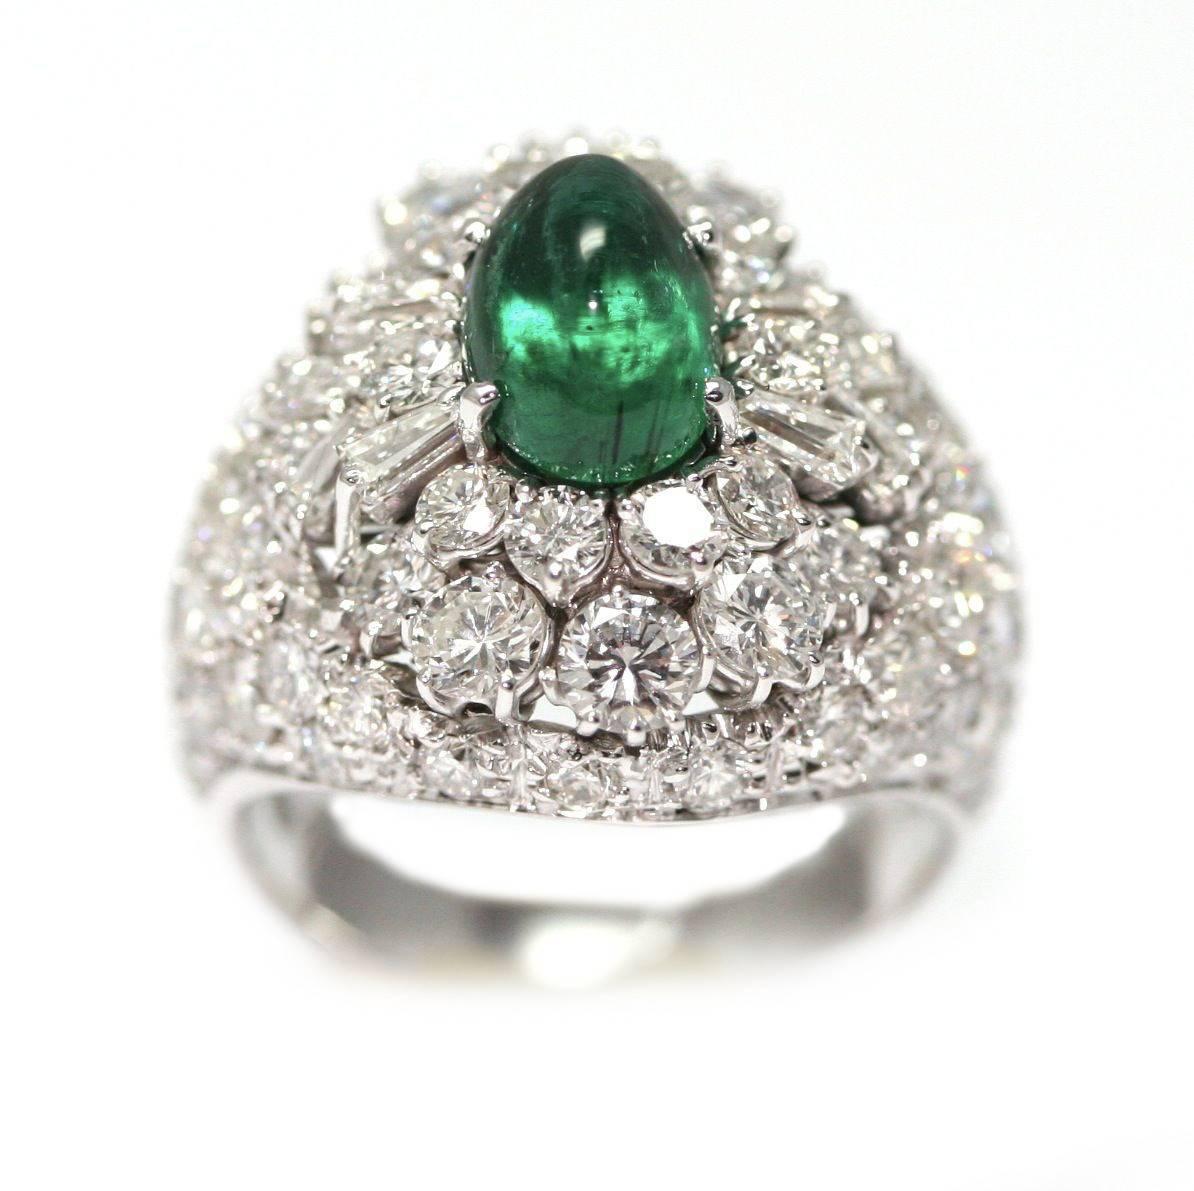 Sugarloaf Cabochon Dome ring set with 5 carats of diamonds and a 2.68 carats sugarloaf emerald For Sale